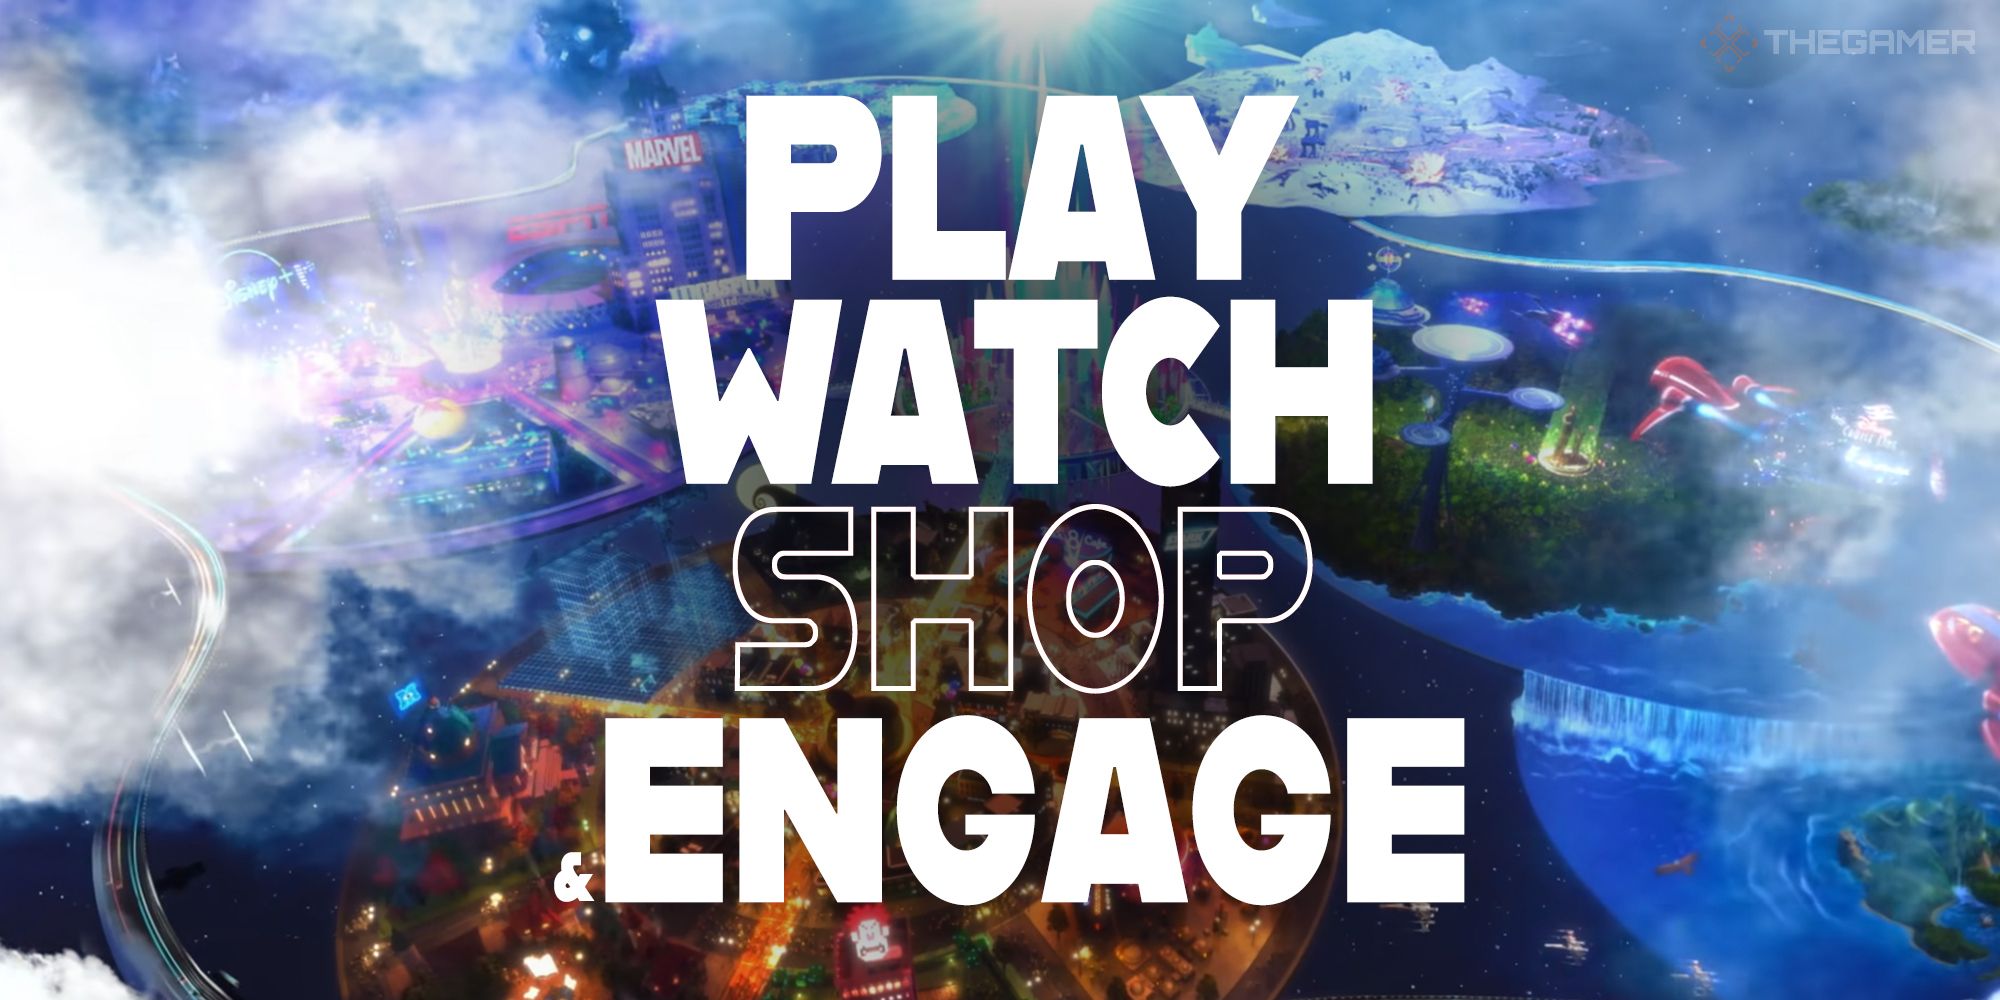 A screenshot of Epic Games' and Disney's crossover trailer with the words Play, Watch and Engage in block white letters and Shop in a white outline